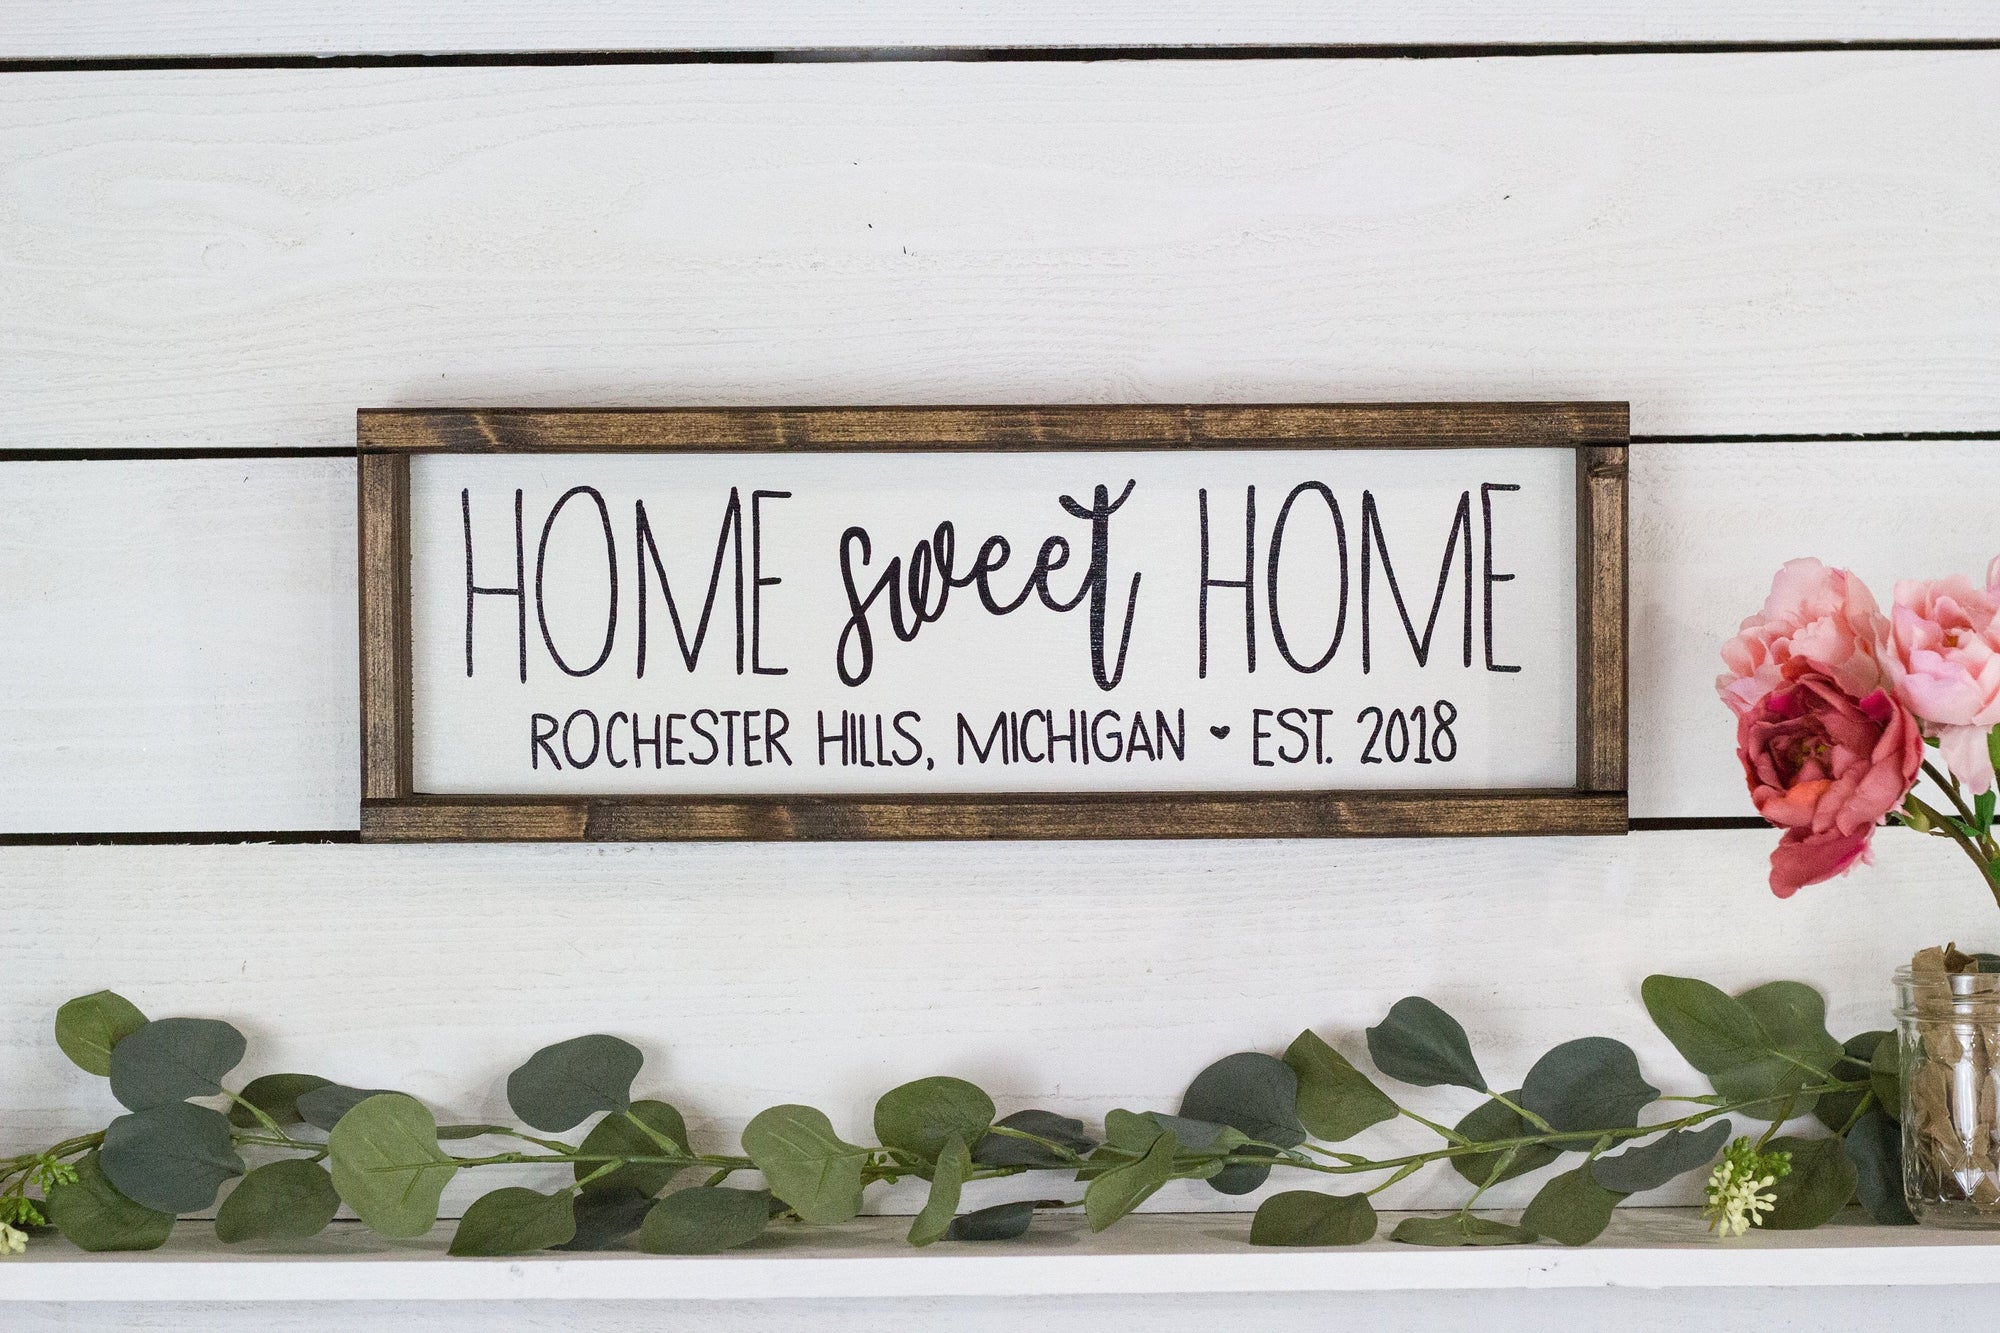 Home Sweet Home Sign with Location and Established Year - City, State Sign